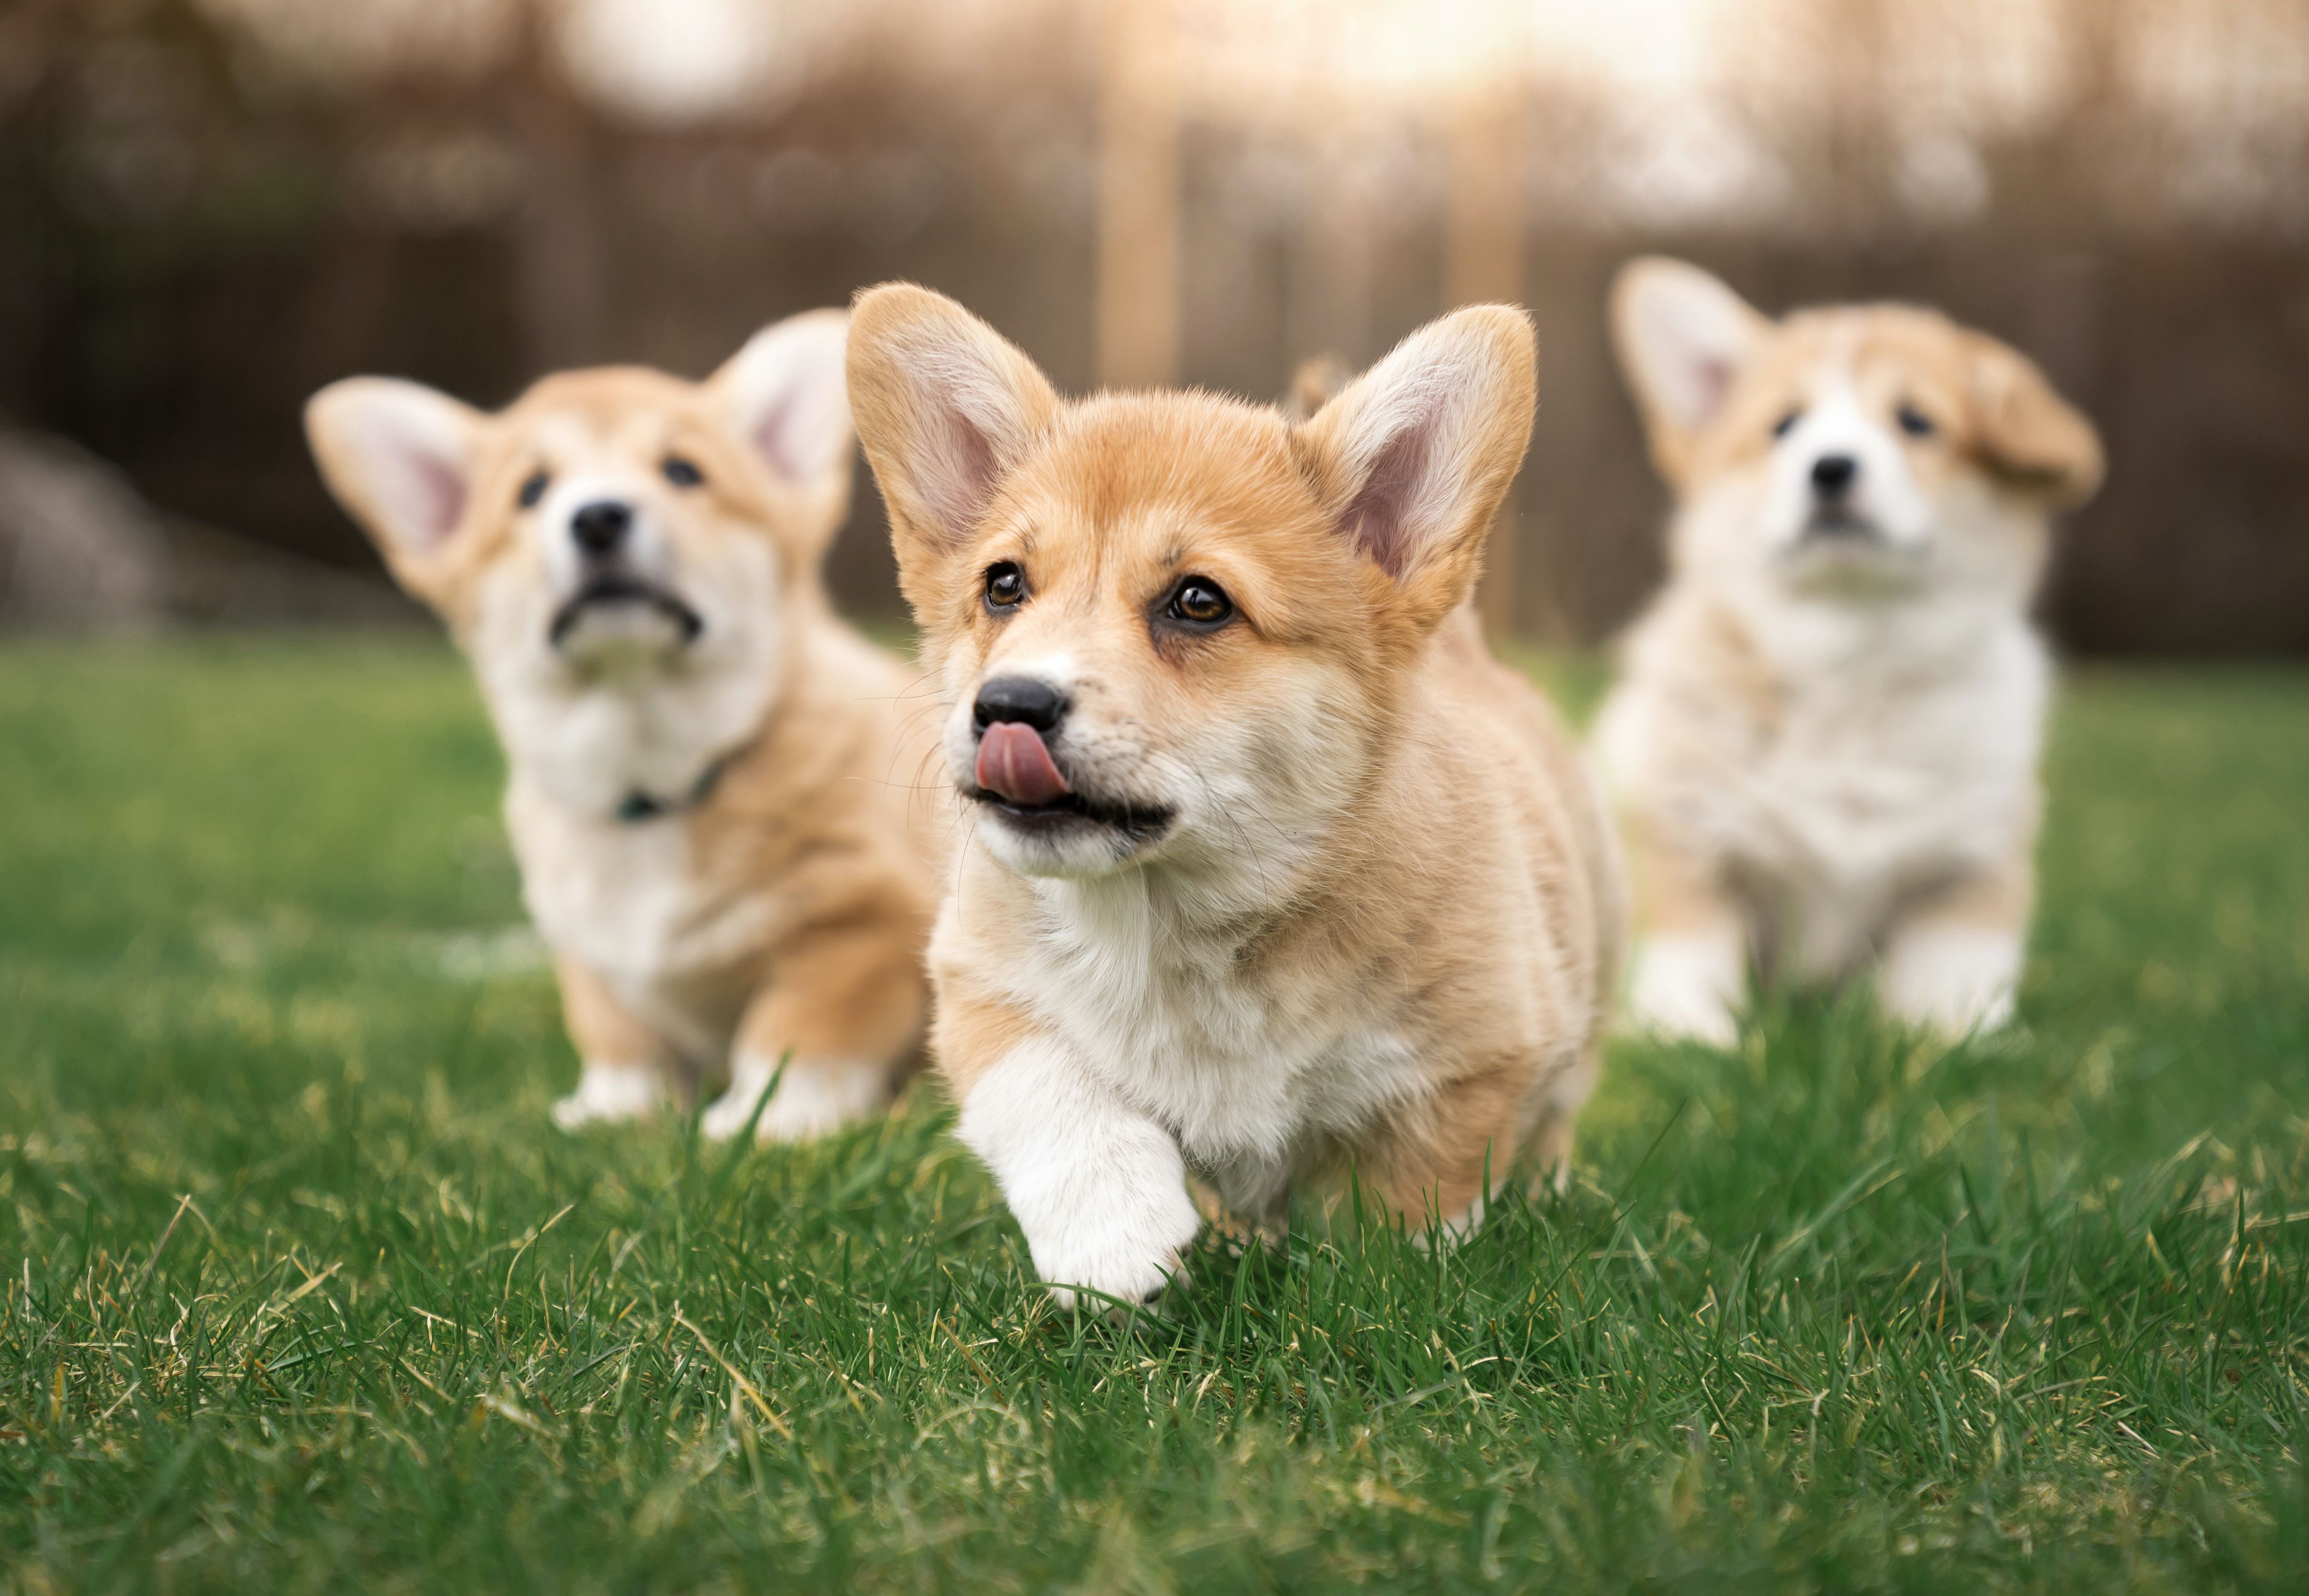 Just in Time for the Queen's Platinum Jubilee, We Give You 'Corgis